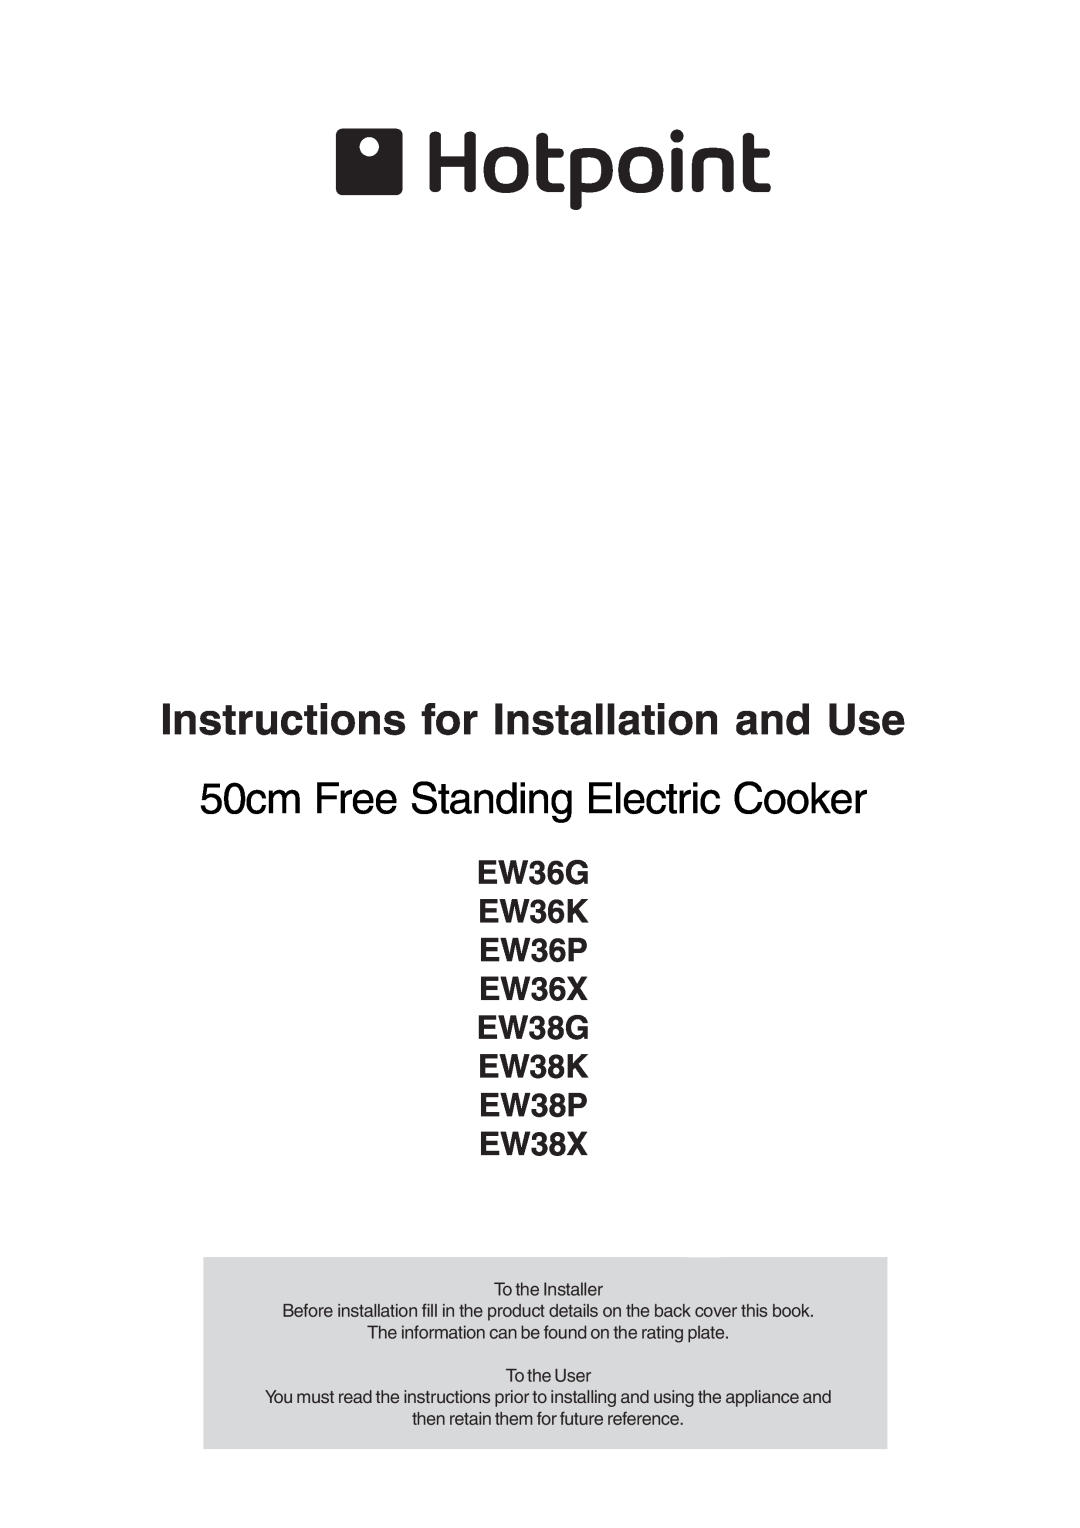 Hotpoint manual EW36G EW36K EW36P EW36X EW38G EW38K EW38P EW38X, Instructions for Installation and Use 